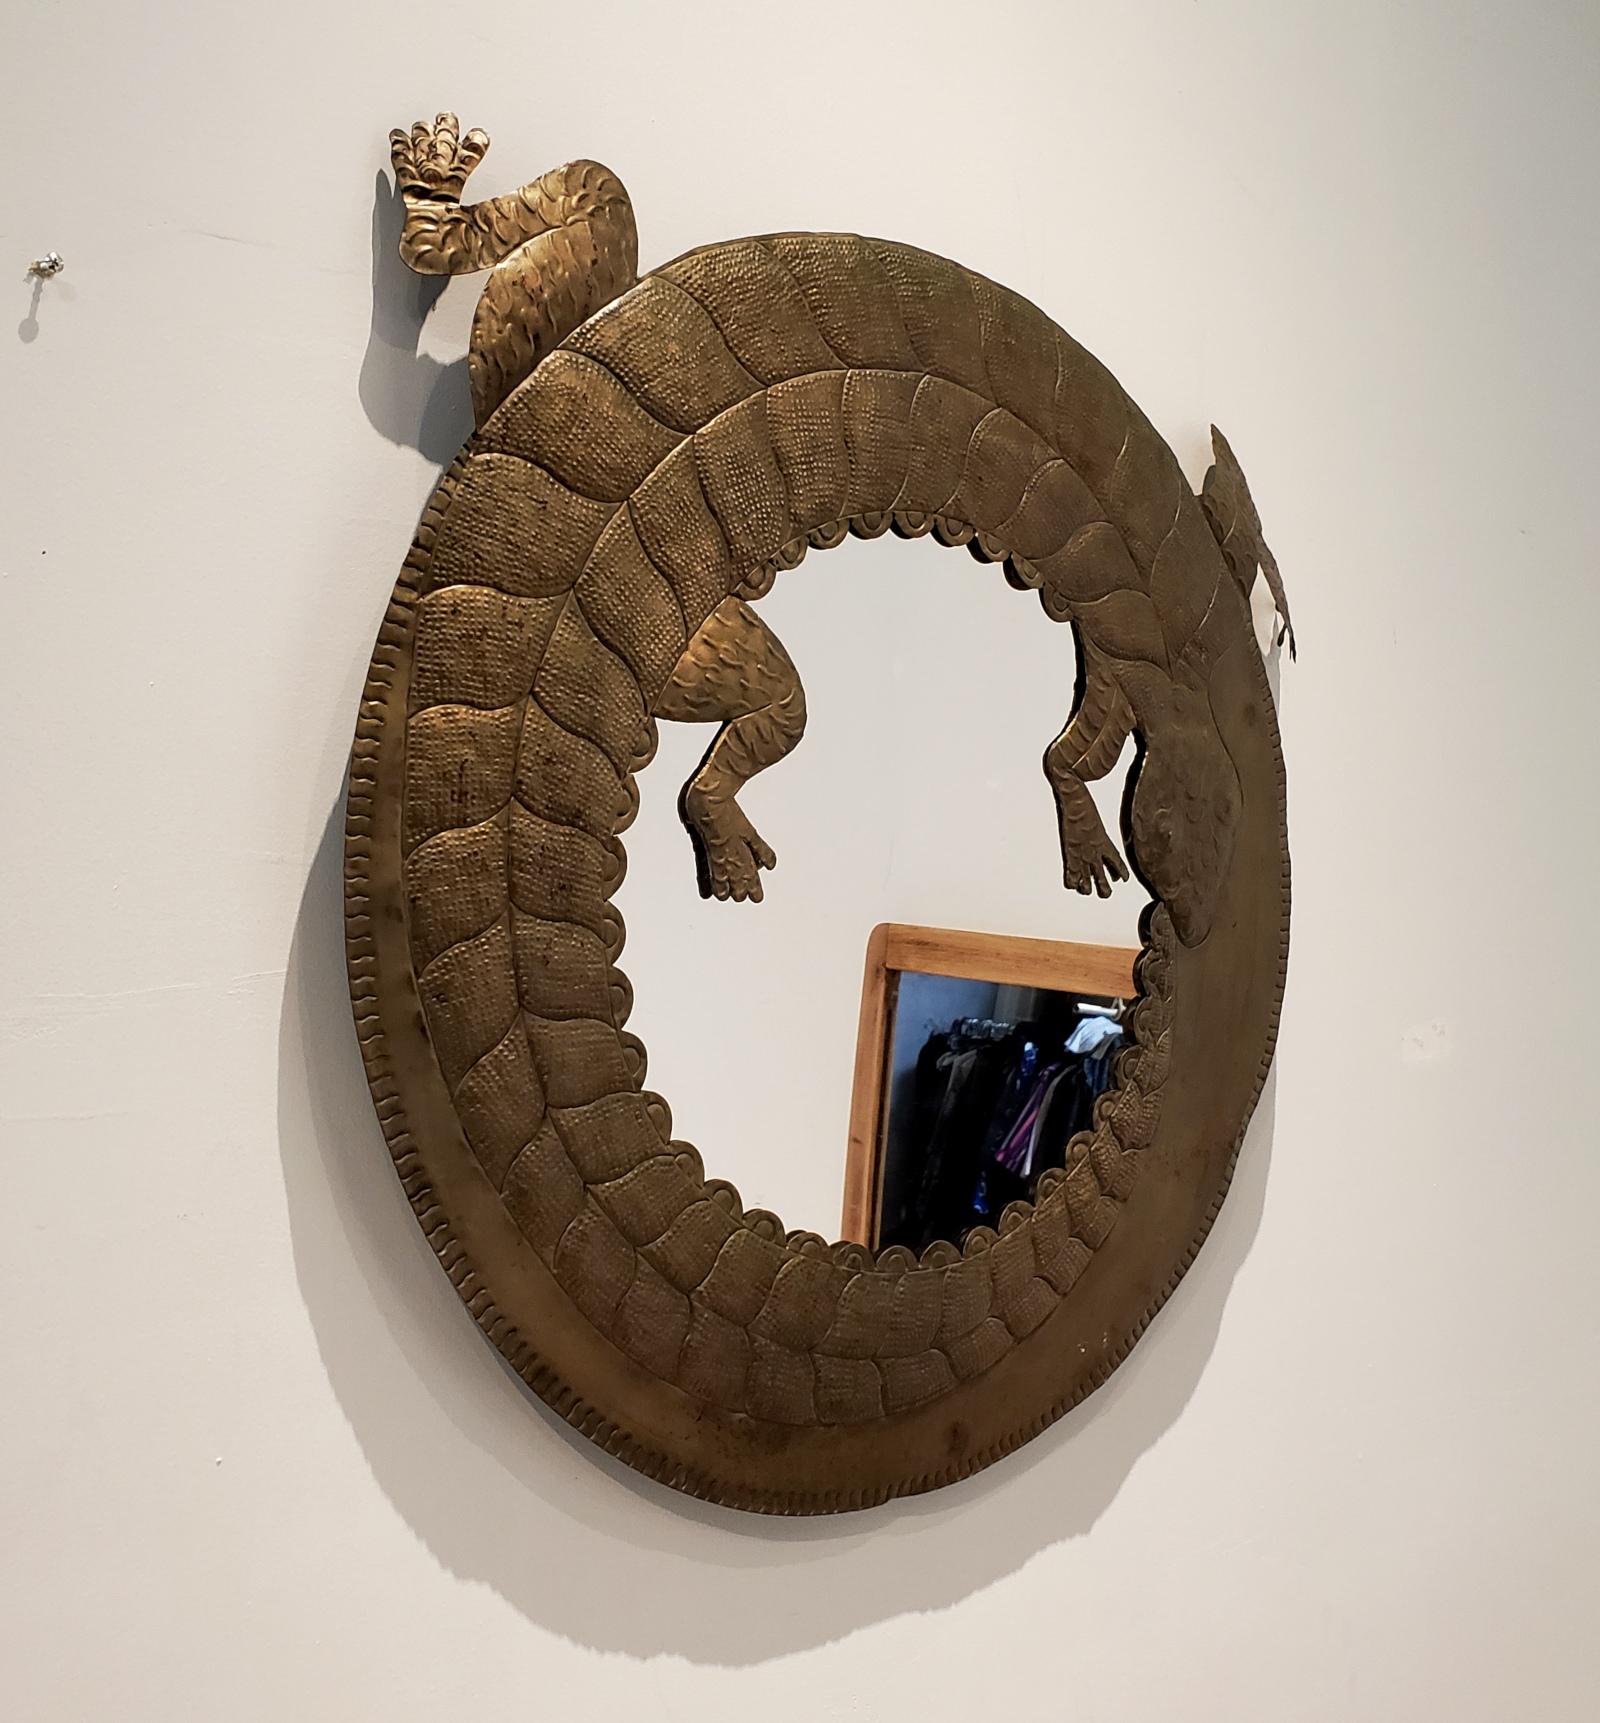 Charming and unique circular mirror with coiled lizard framed. Handmade in Mexico of hammered and cut brass, circa 1970s. The mirror measures: 27.5